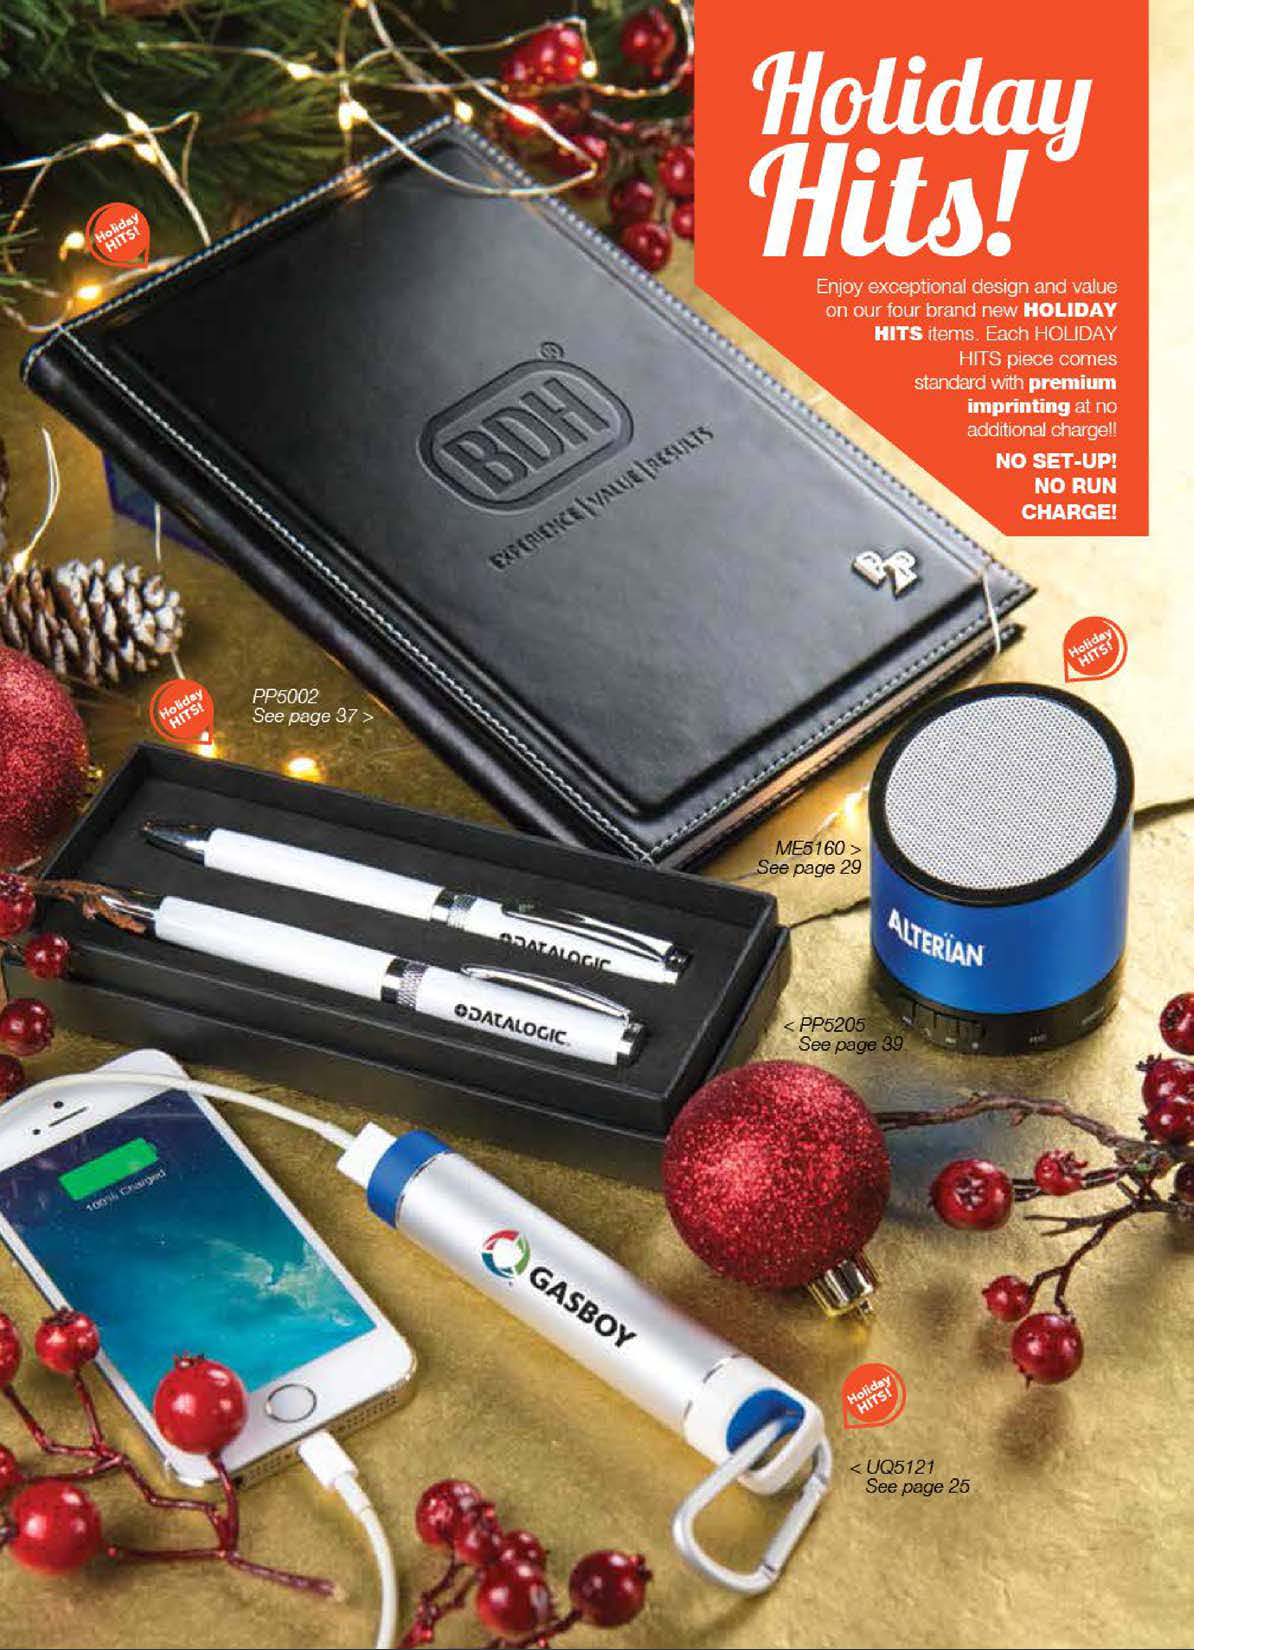 FREE SETUP Items! &nbsp;Click for full holiday catalog, though not all items have free setup.